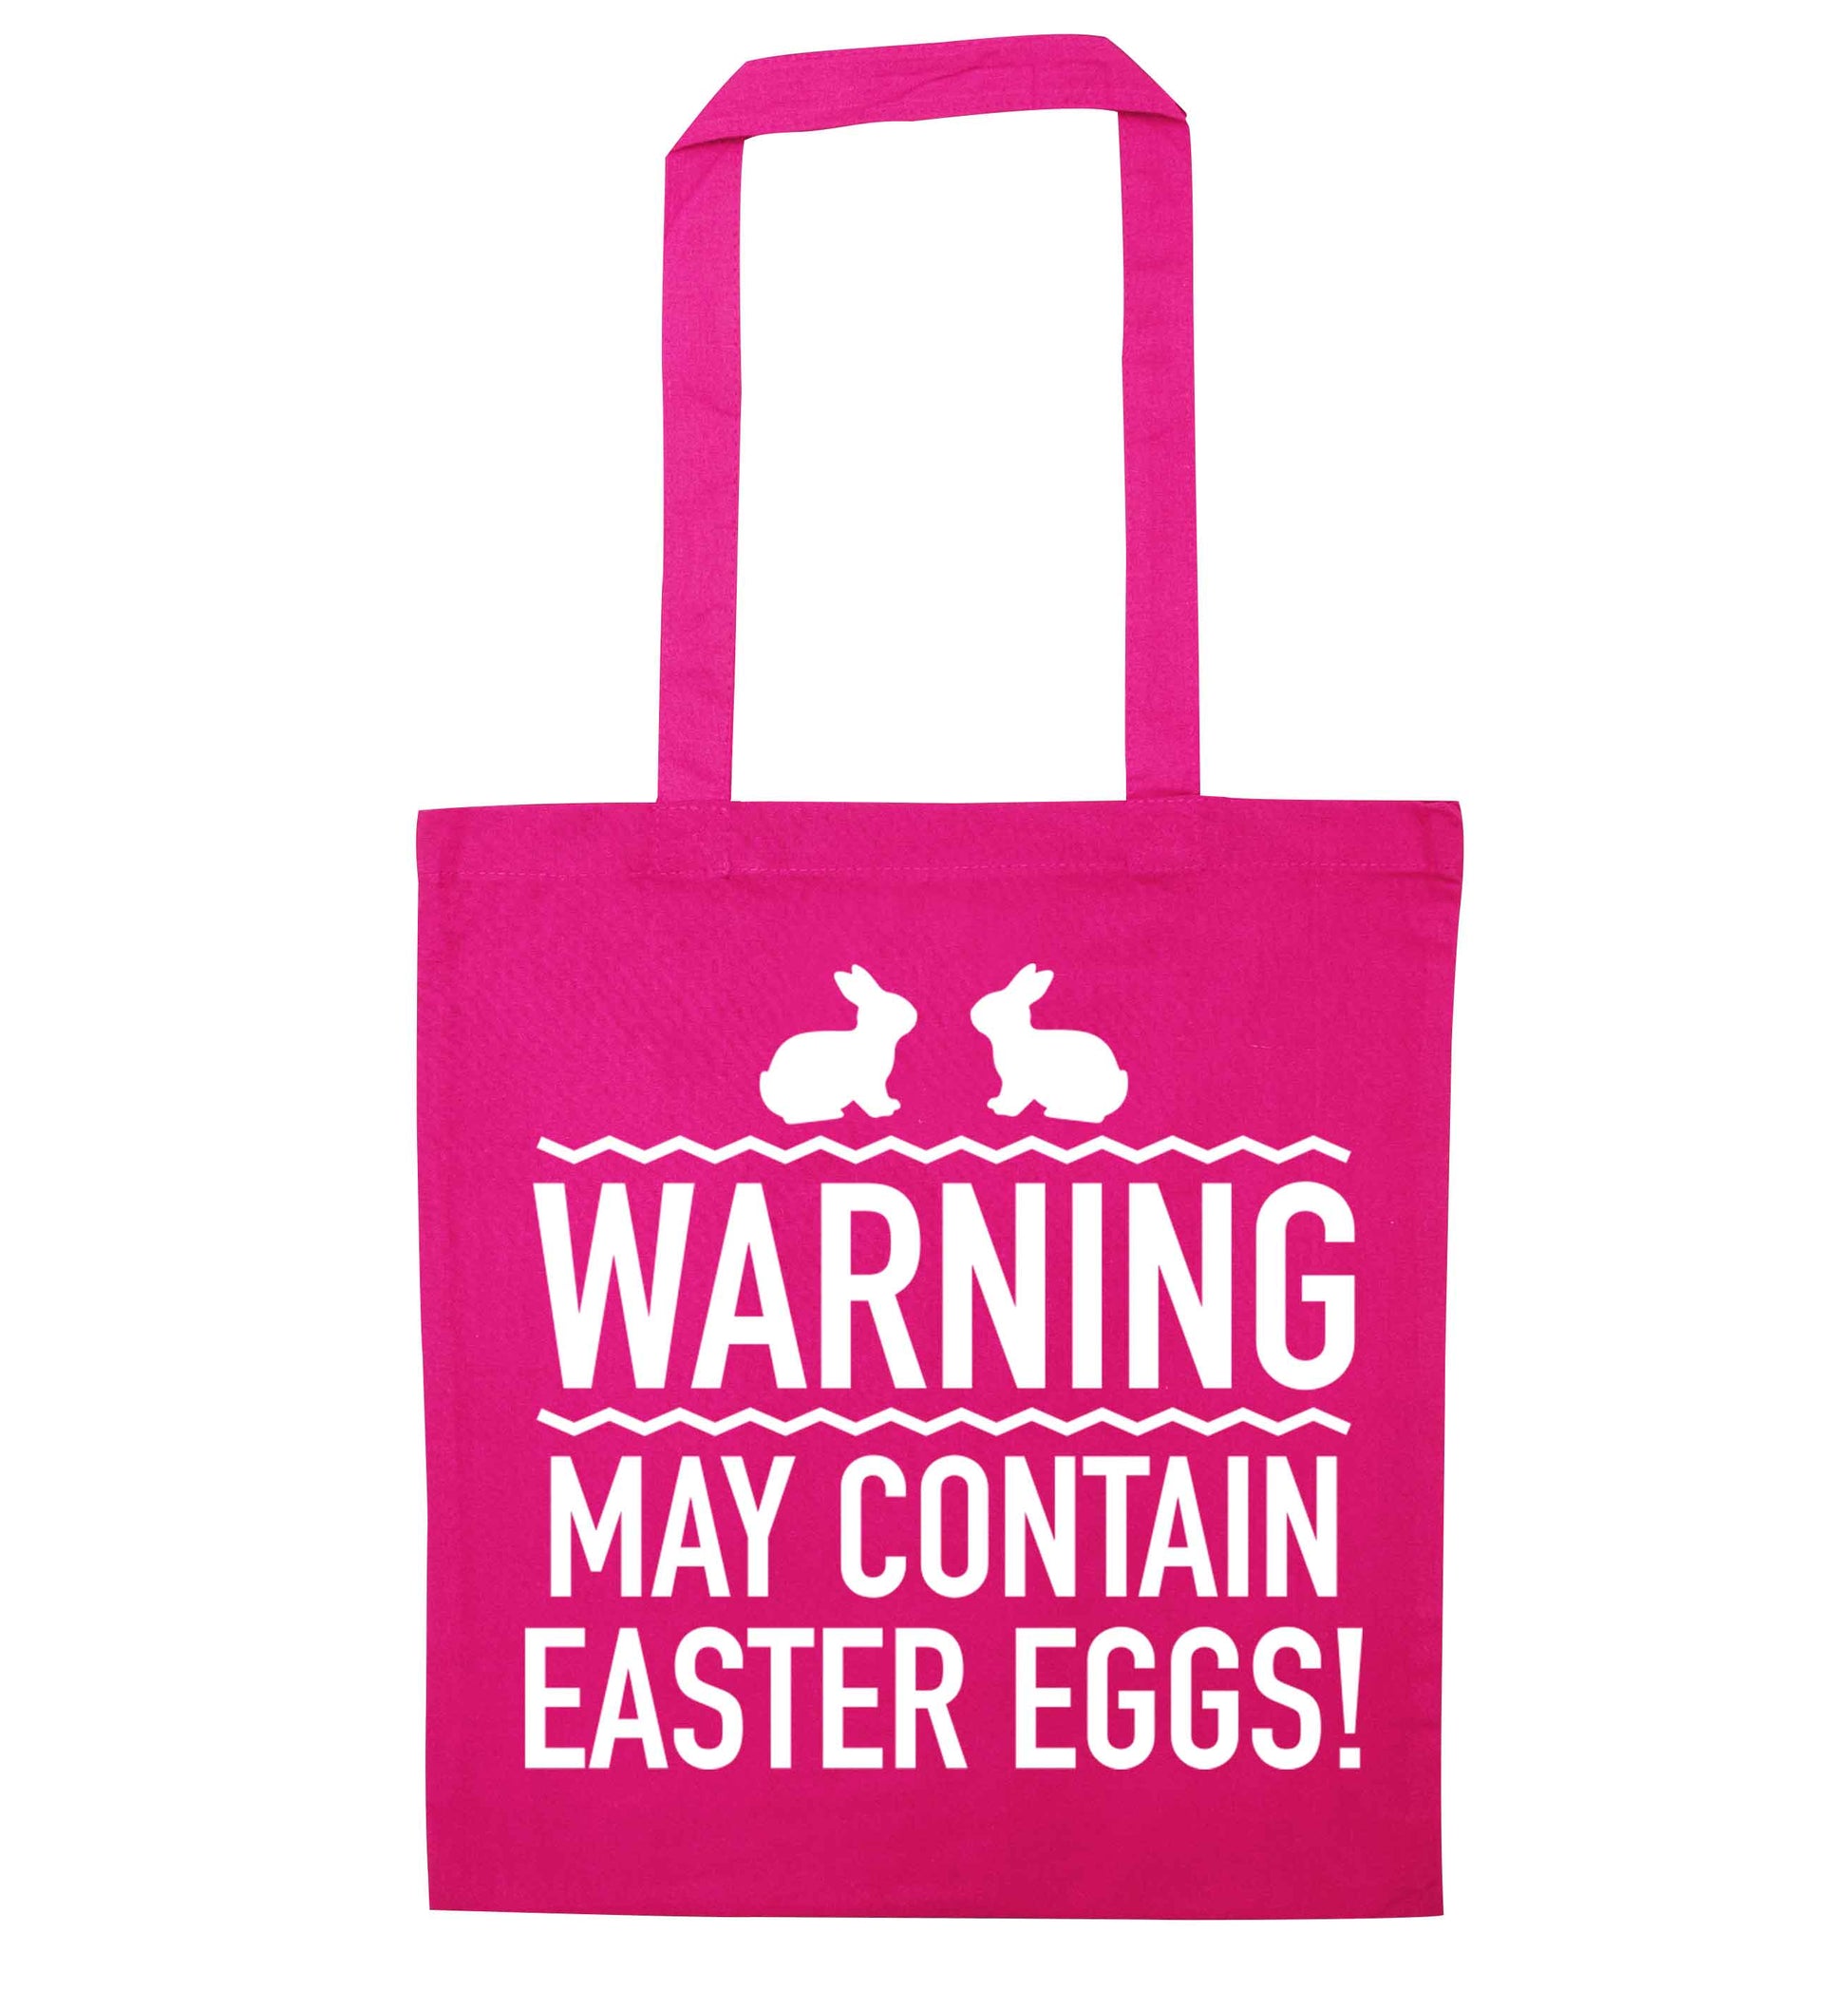 Warning may contain Easter eggs pink tote bag